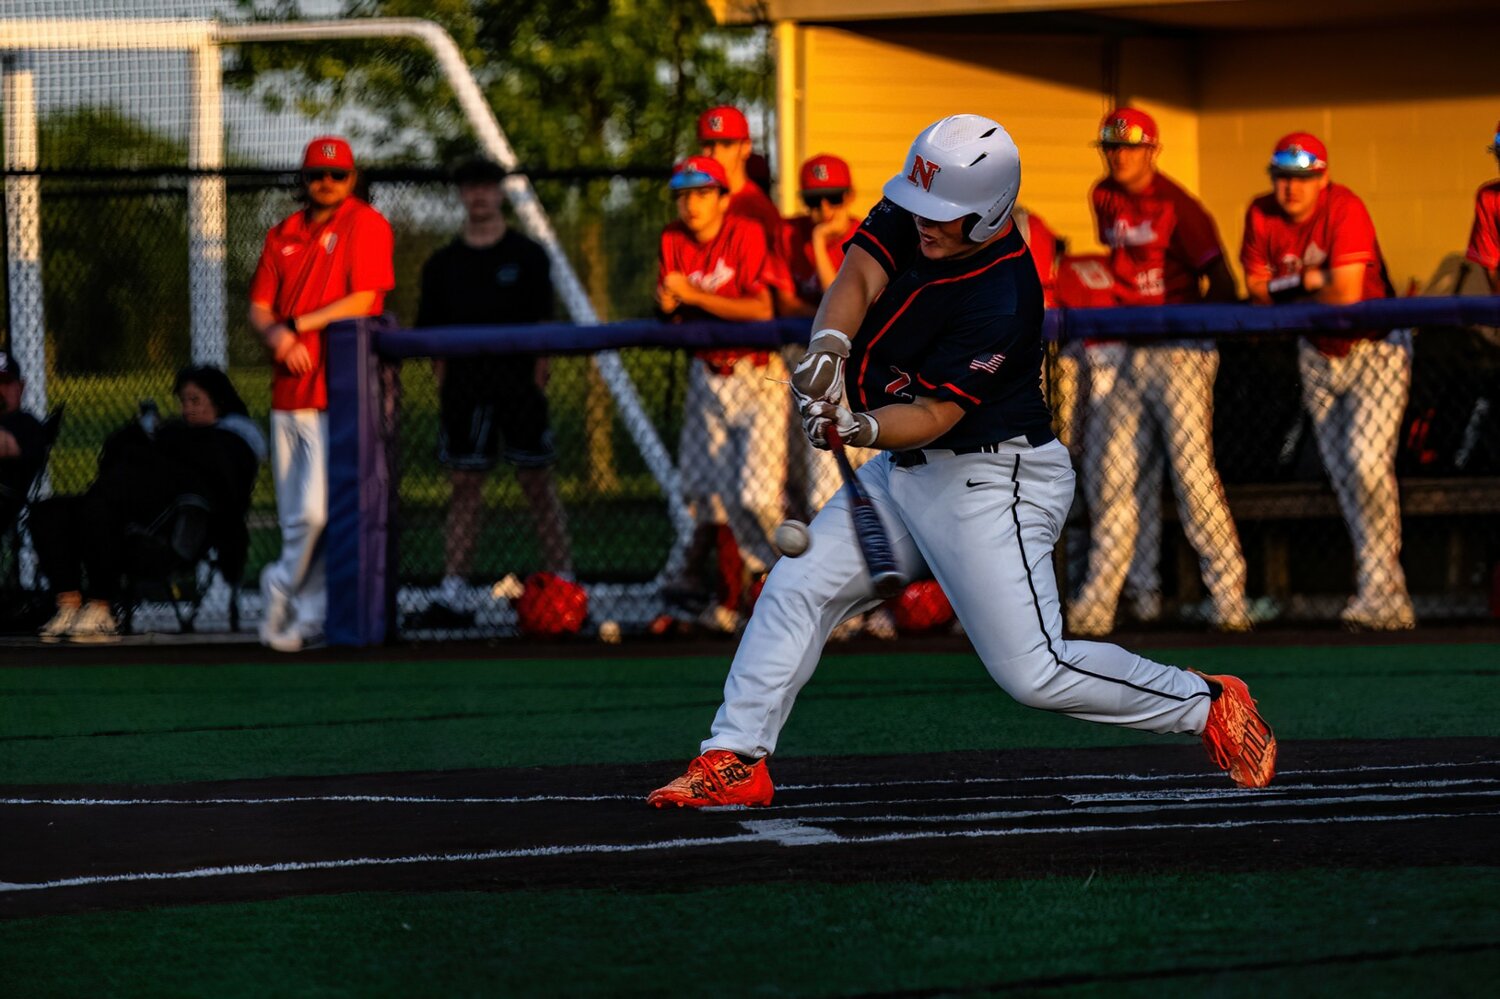 Senior center fielder Ross Dyson had an RBI and scored a run in the Charger win.